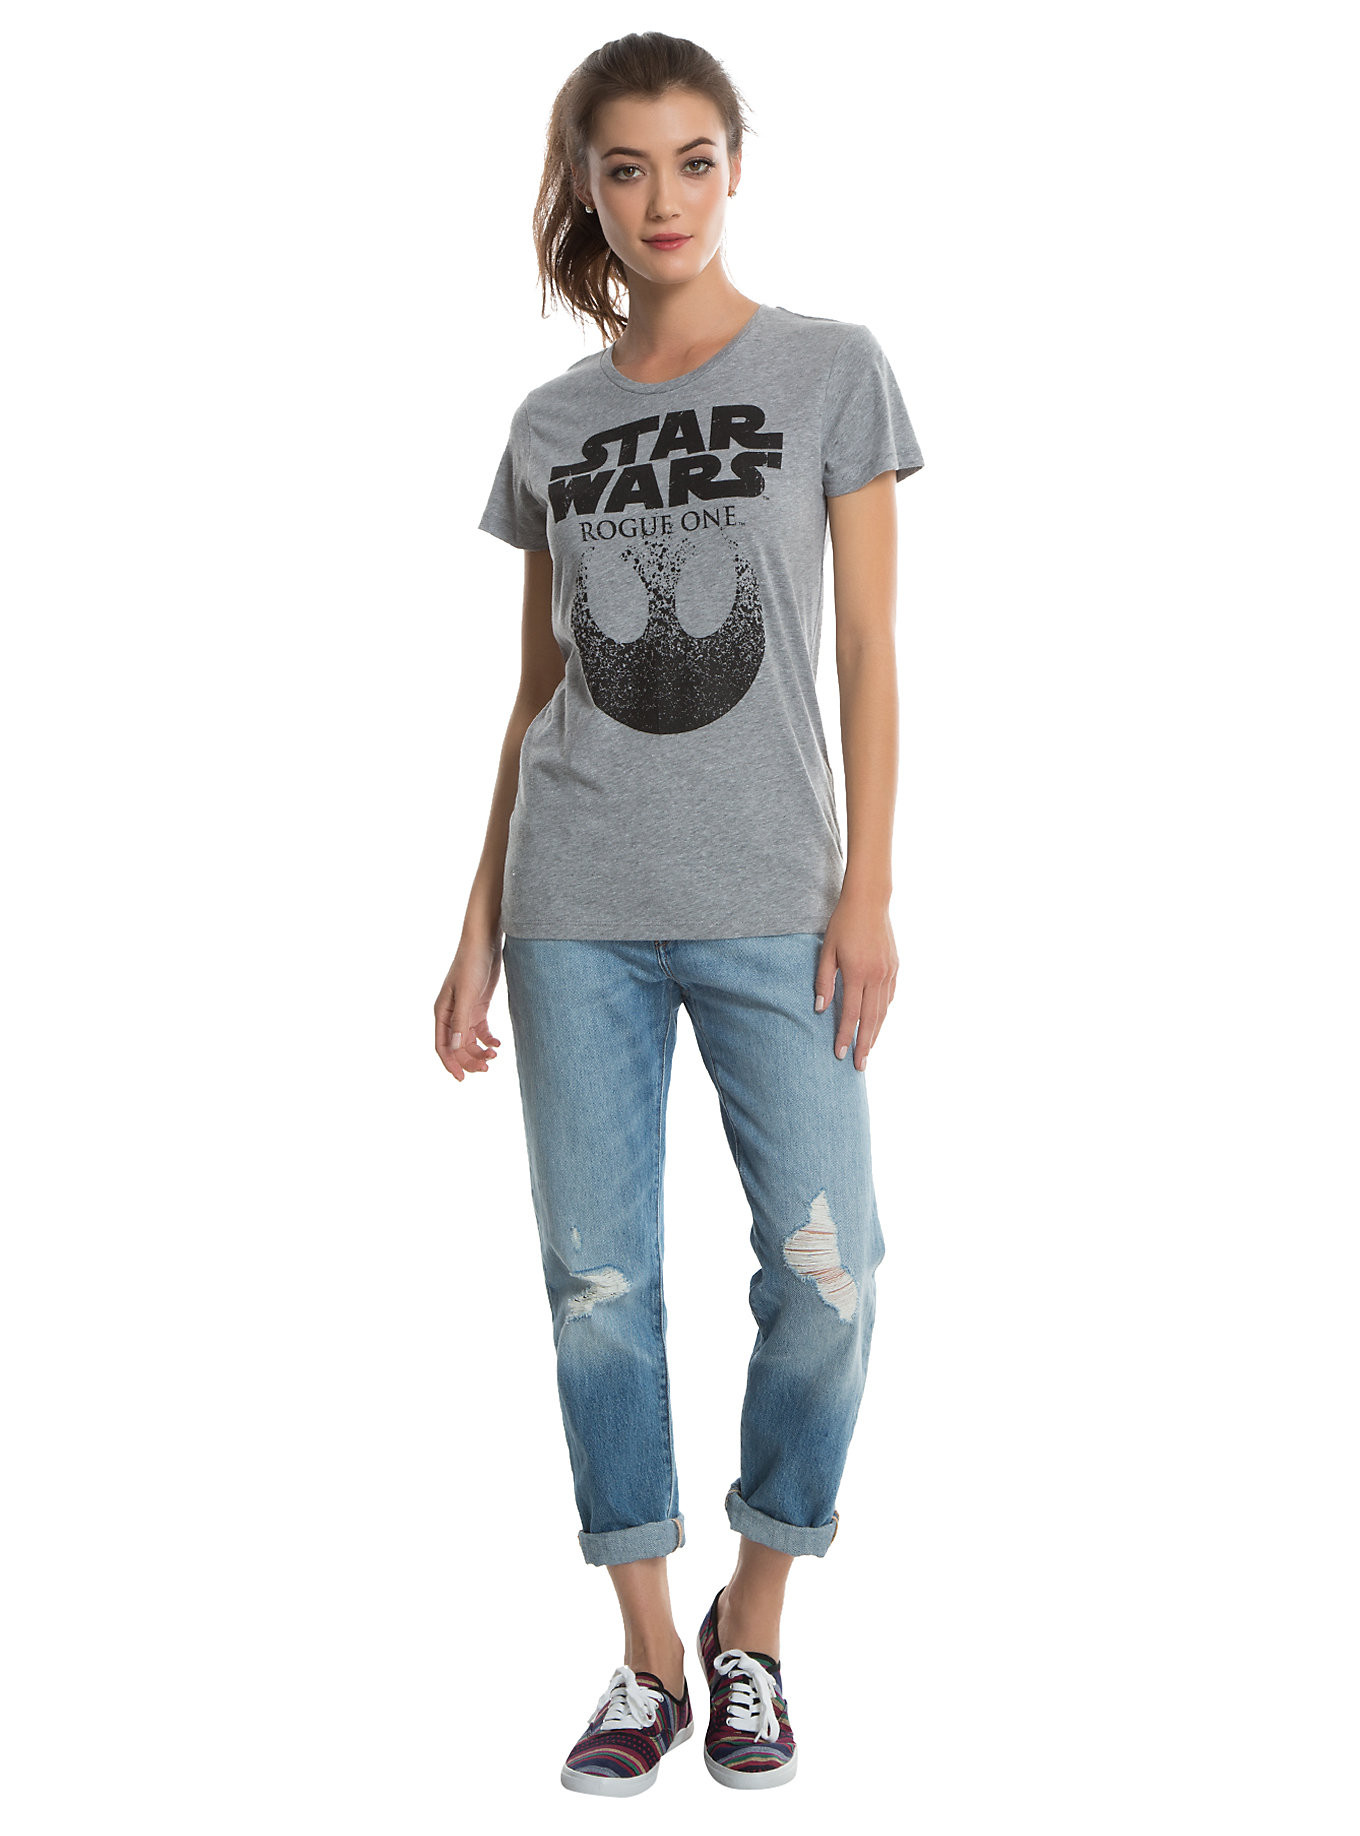 Hot girls in star wars shirts New Women S Rogue One Tee At Hot Topic The Kessel Runway